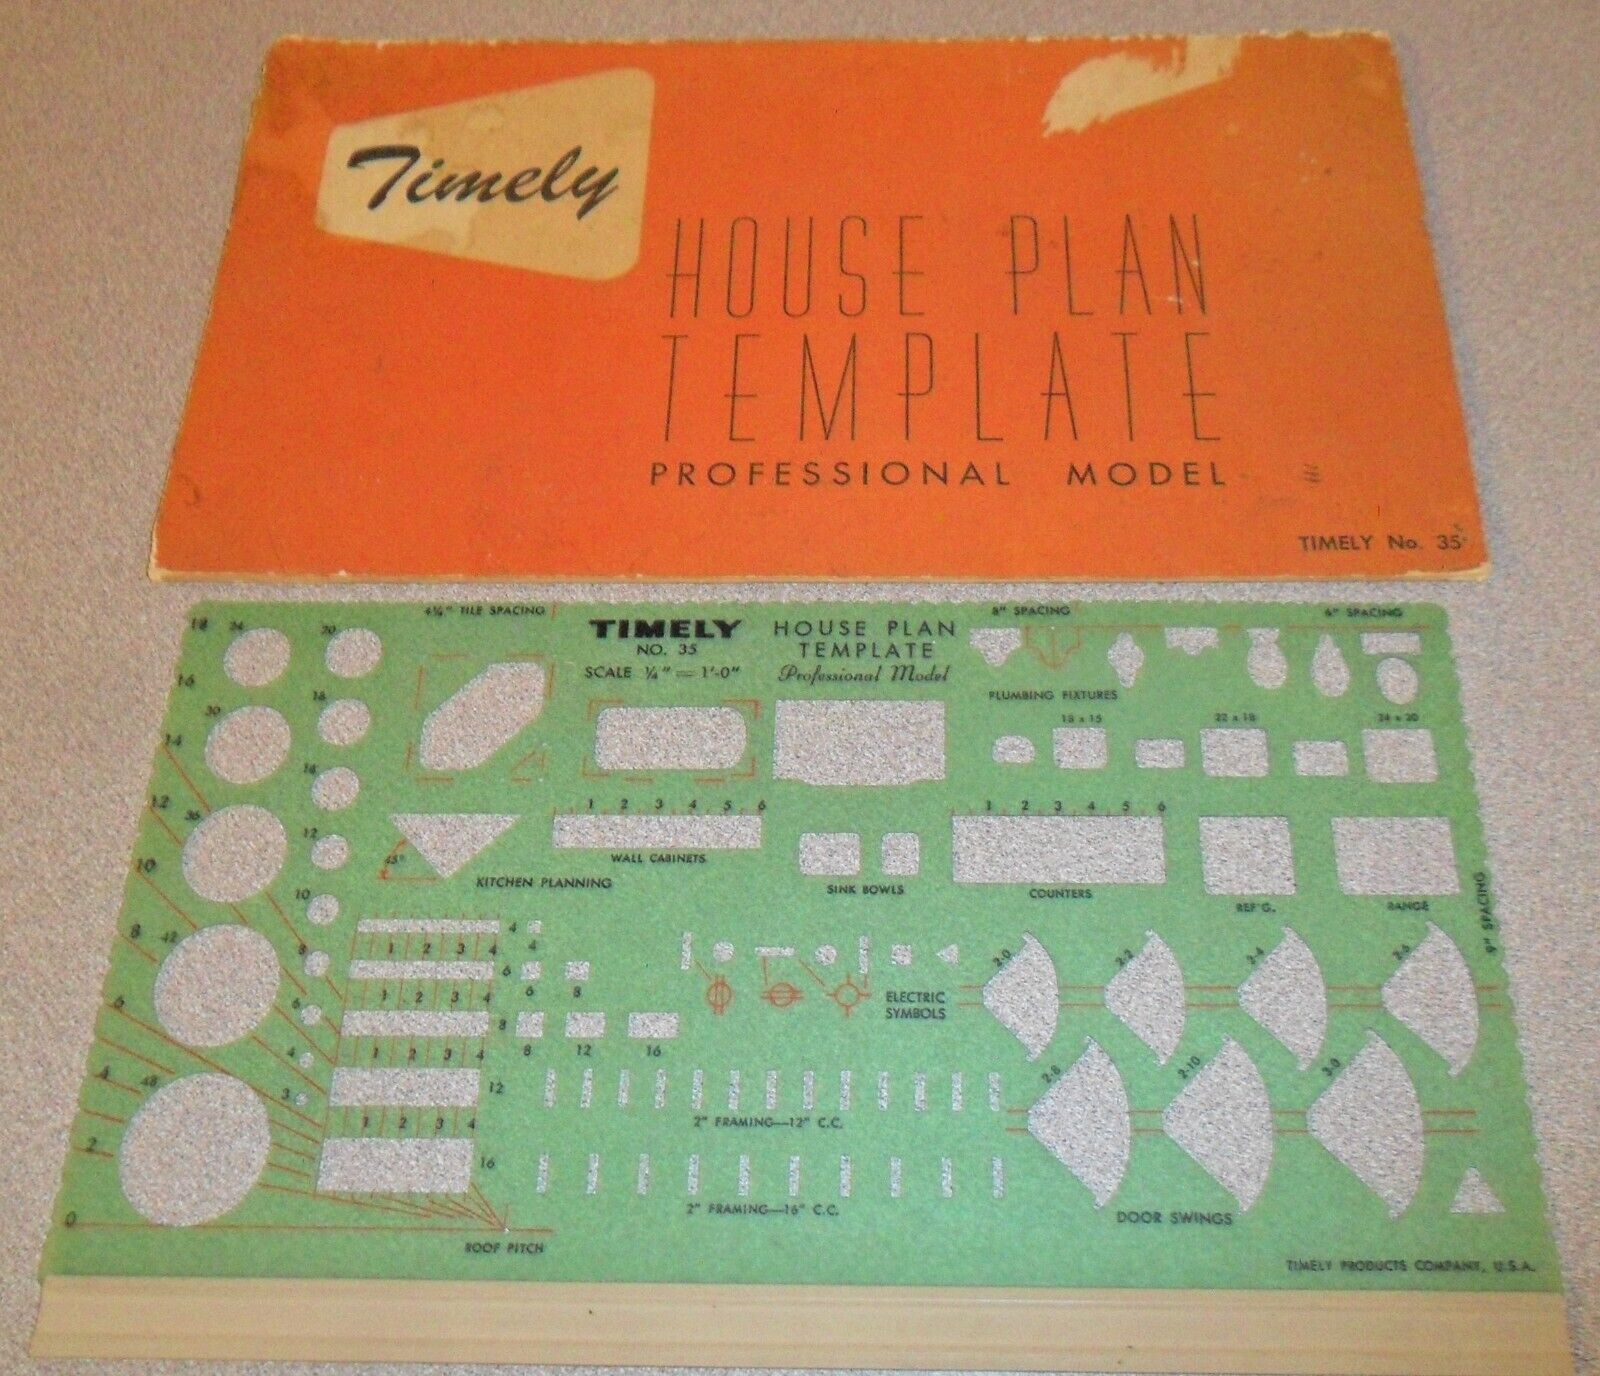 Vintage TIMELY House Plan Architecture Drawing Templet Professional Model No. 35